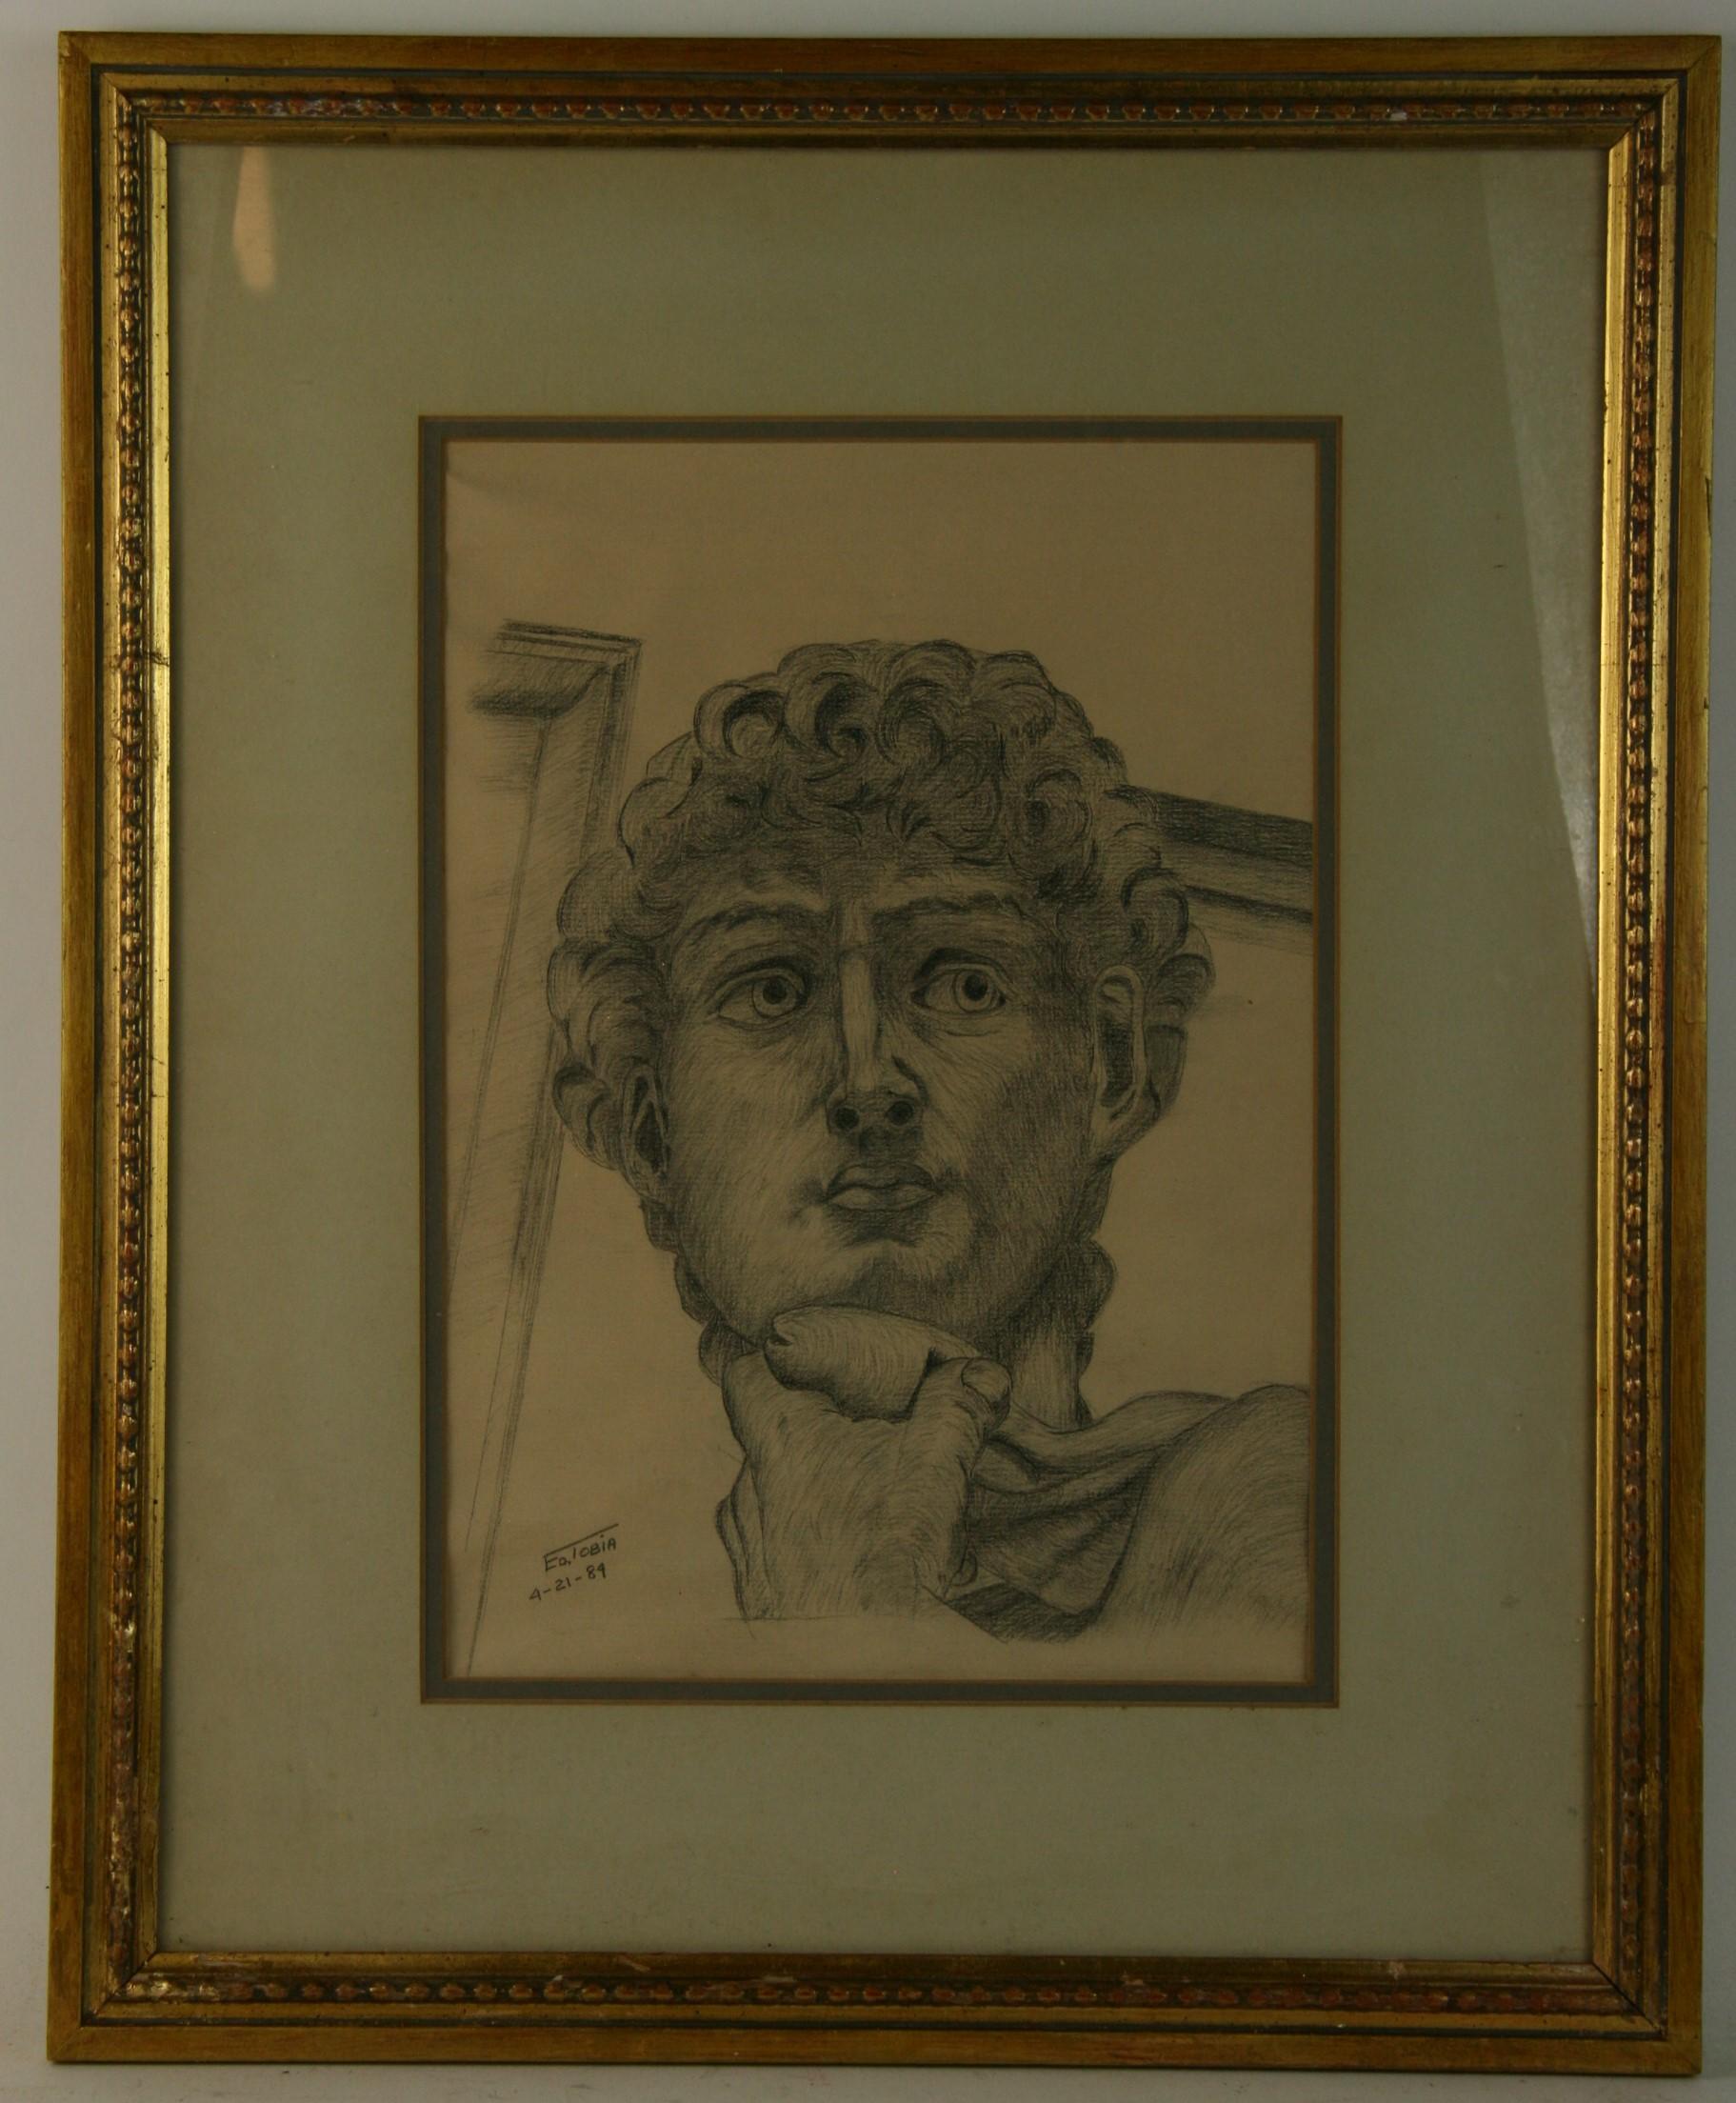 Vintage Classical Italian Charcoal Drawing of Michelangelo's David - Art by E.Tobia